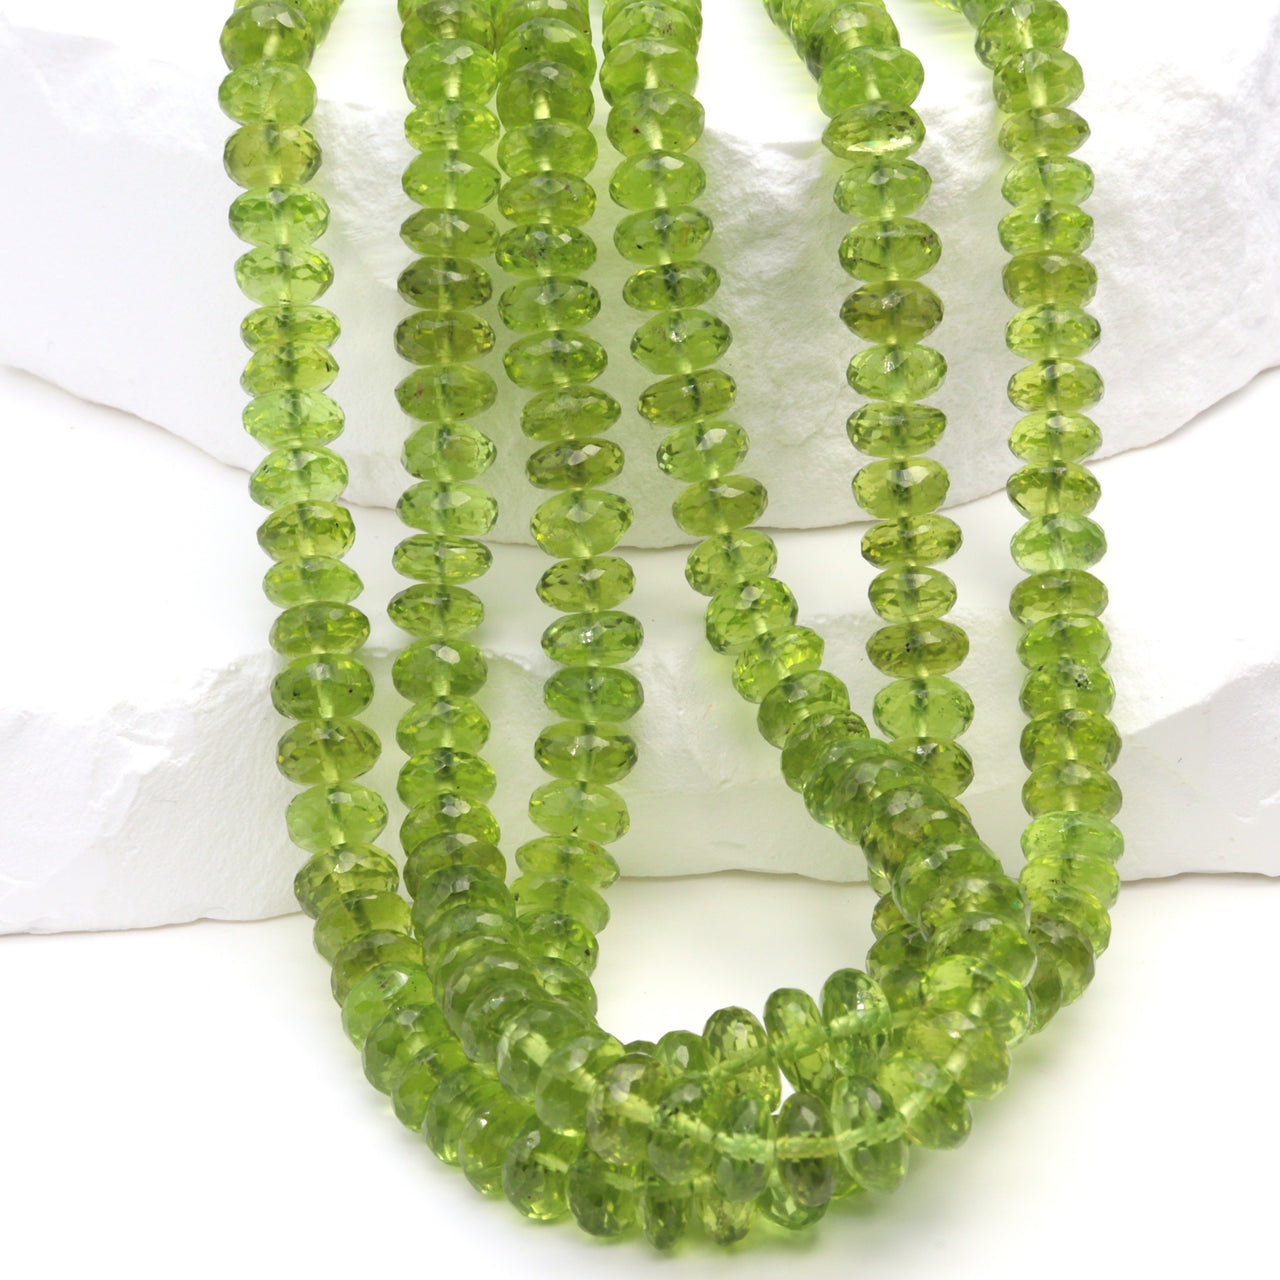 Green Peridot 6mm Faceted Rondelles